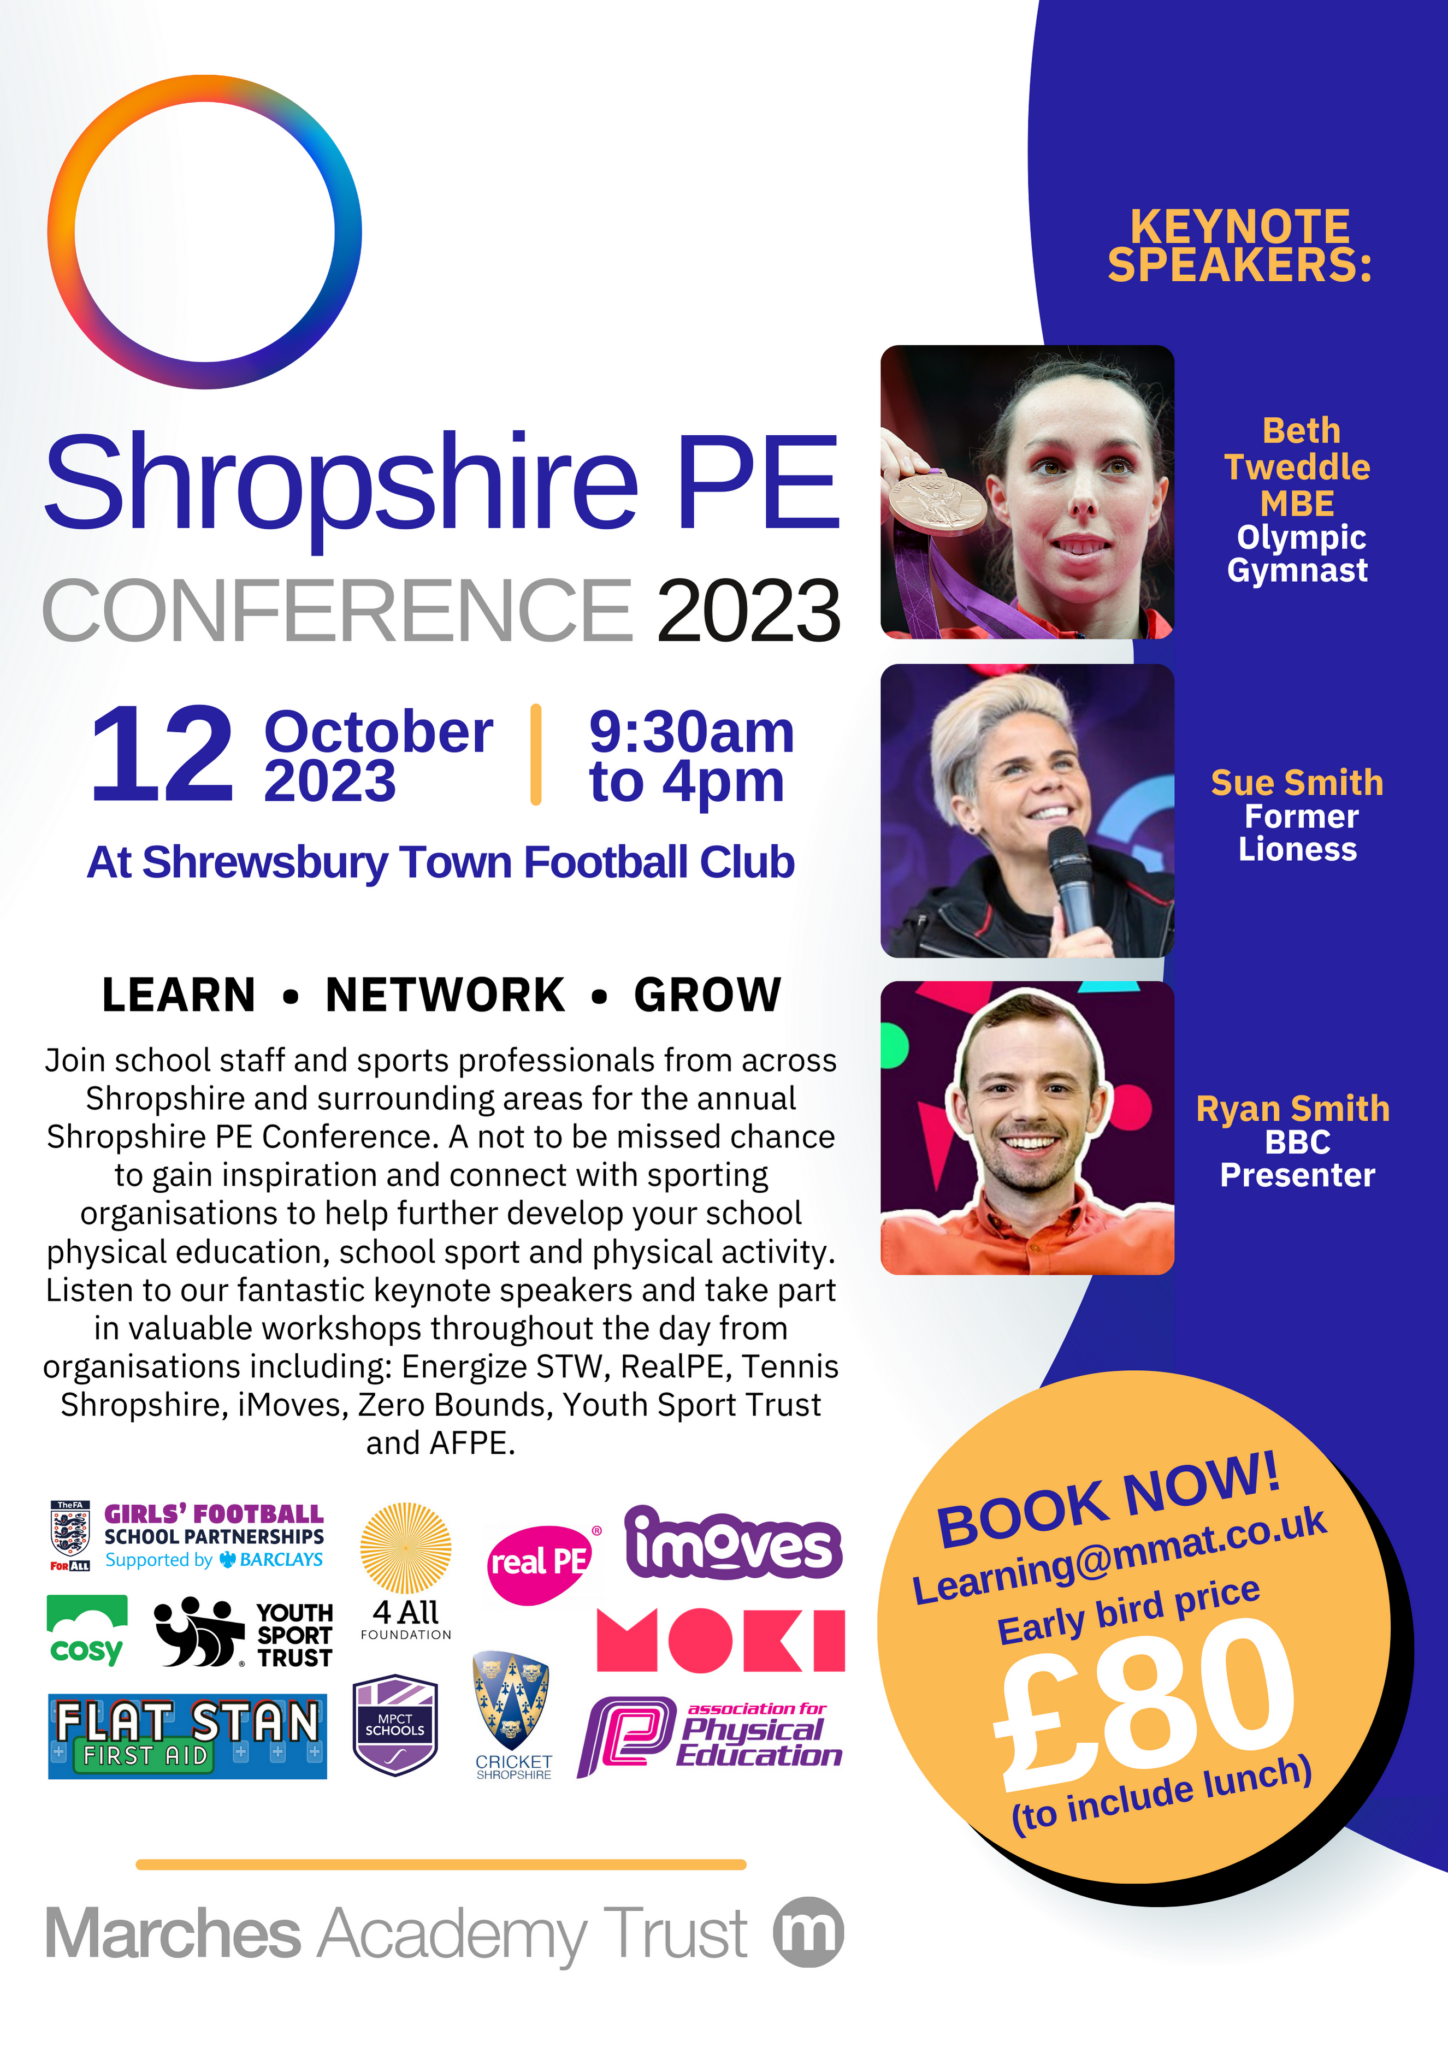 Shropshire PE Conference 2023 Marches Academy Trust